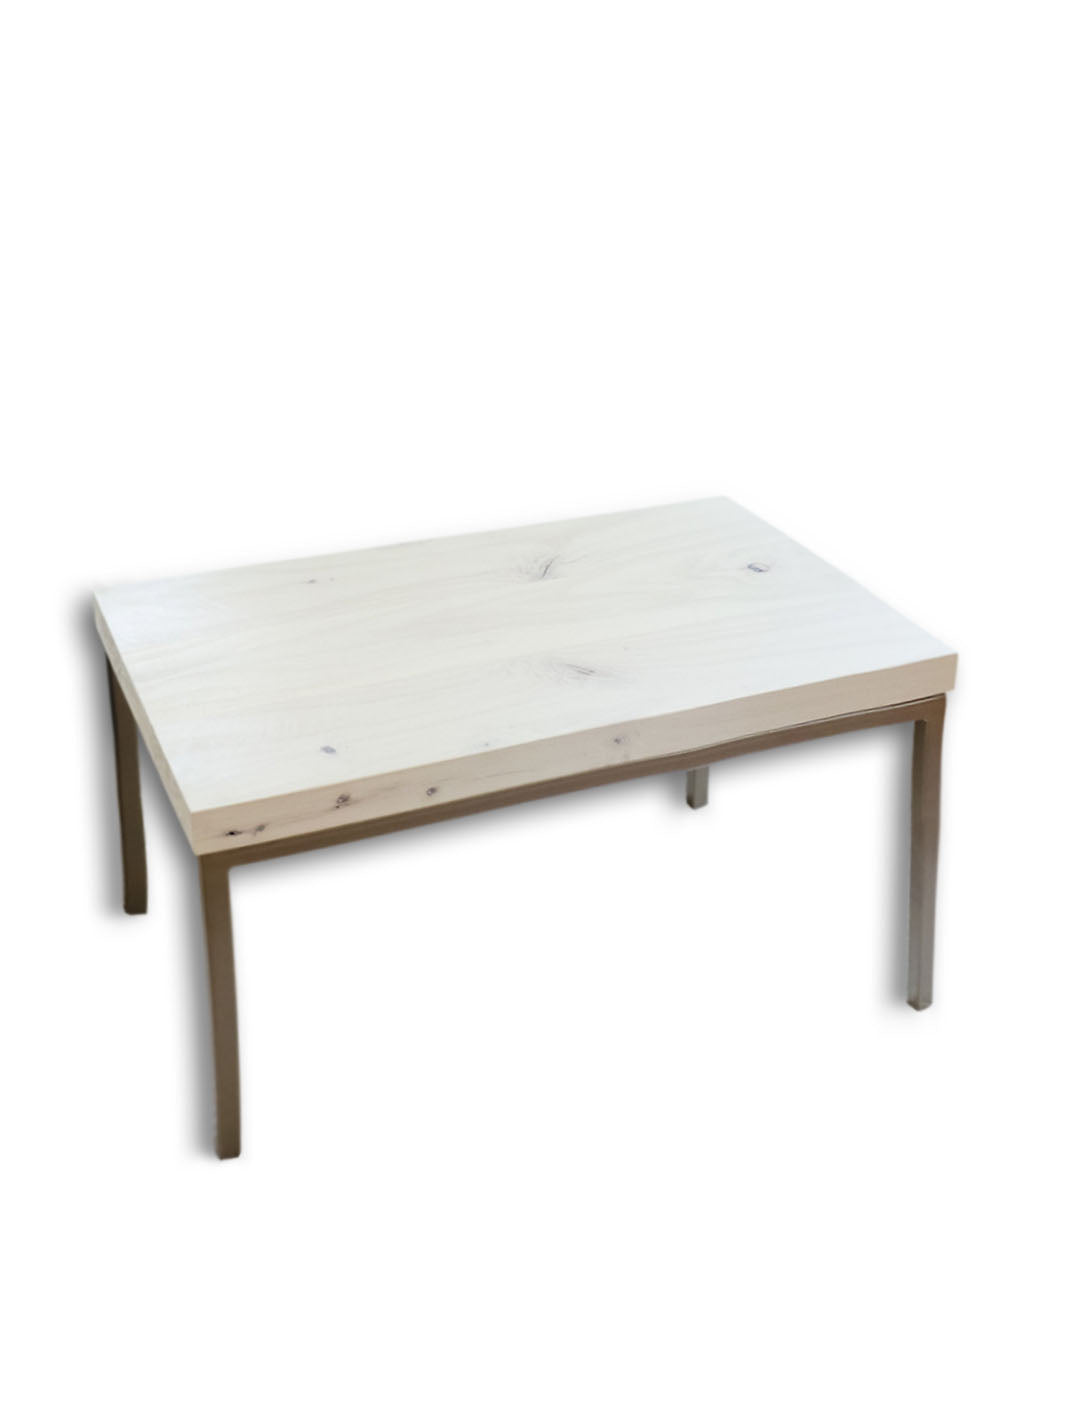 Earthly Comfort Modern White Maple Coffee Table Earthly Comfort Coffee Tables 1821